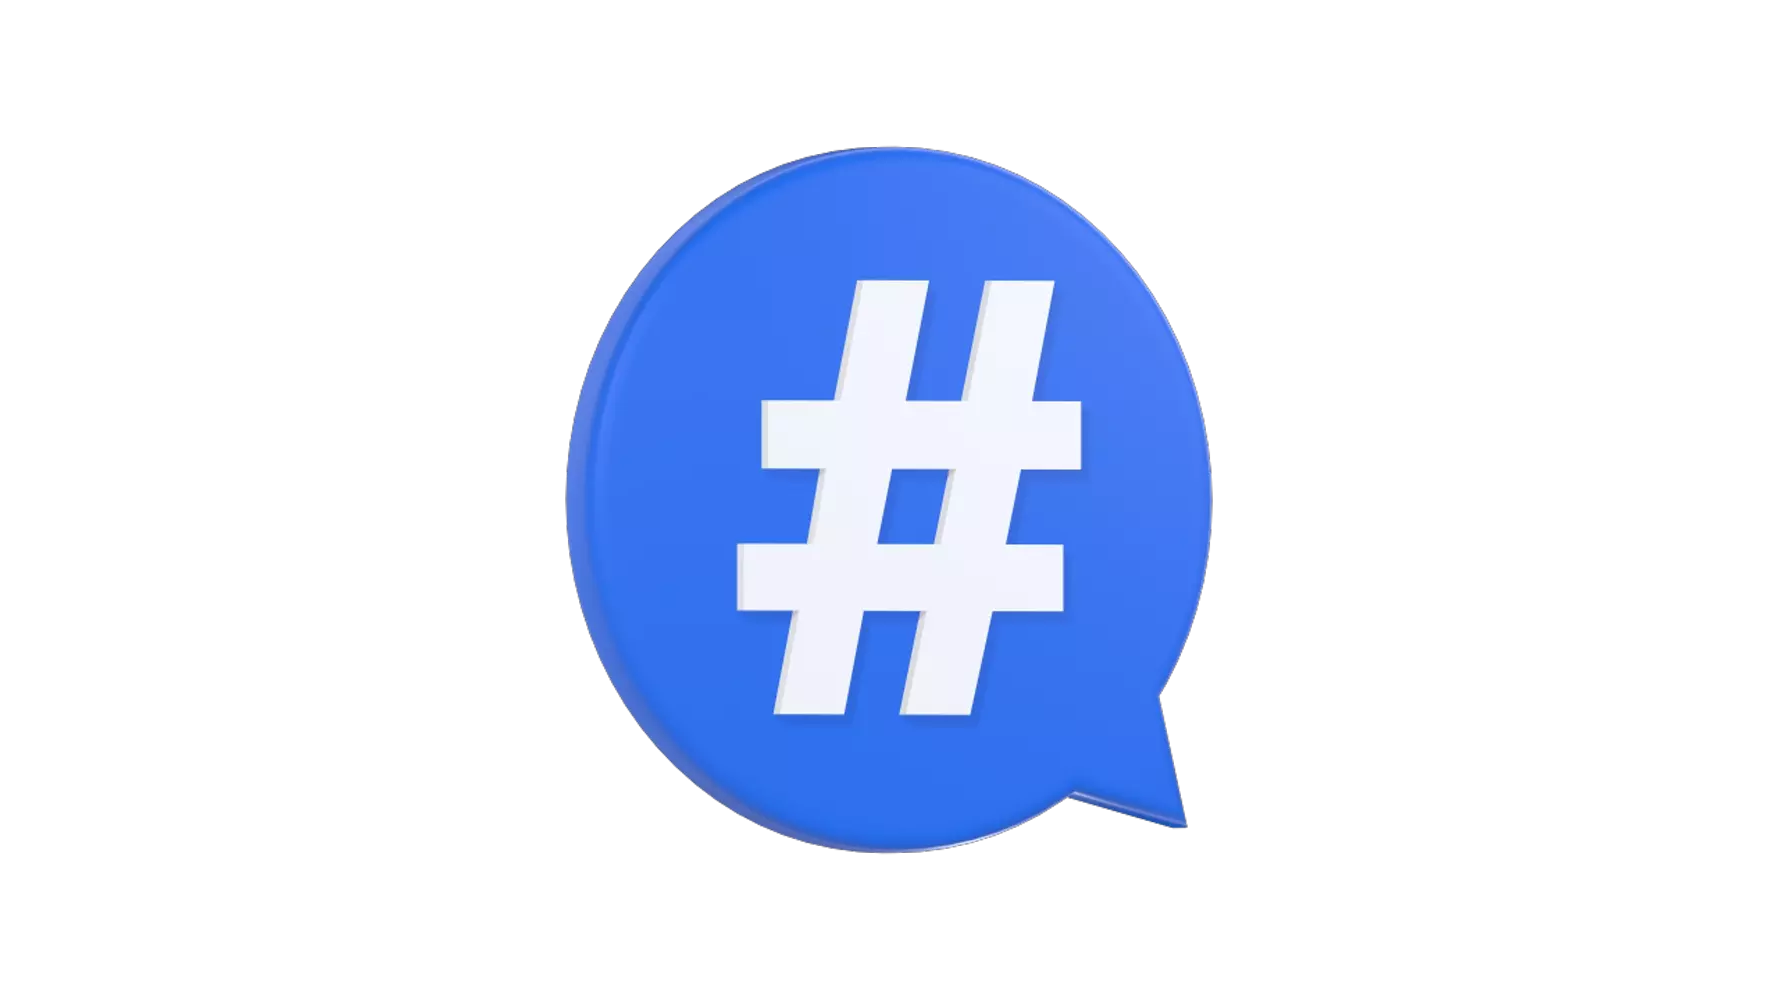 Hashtag Chat 3D Graphic